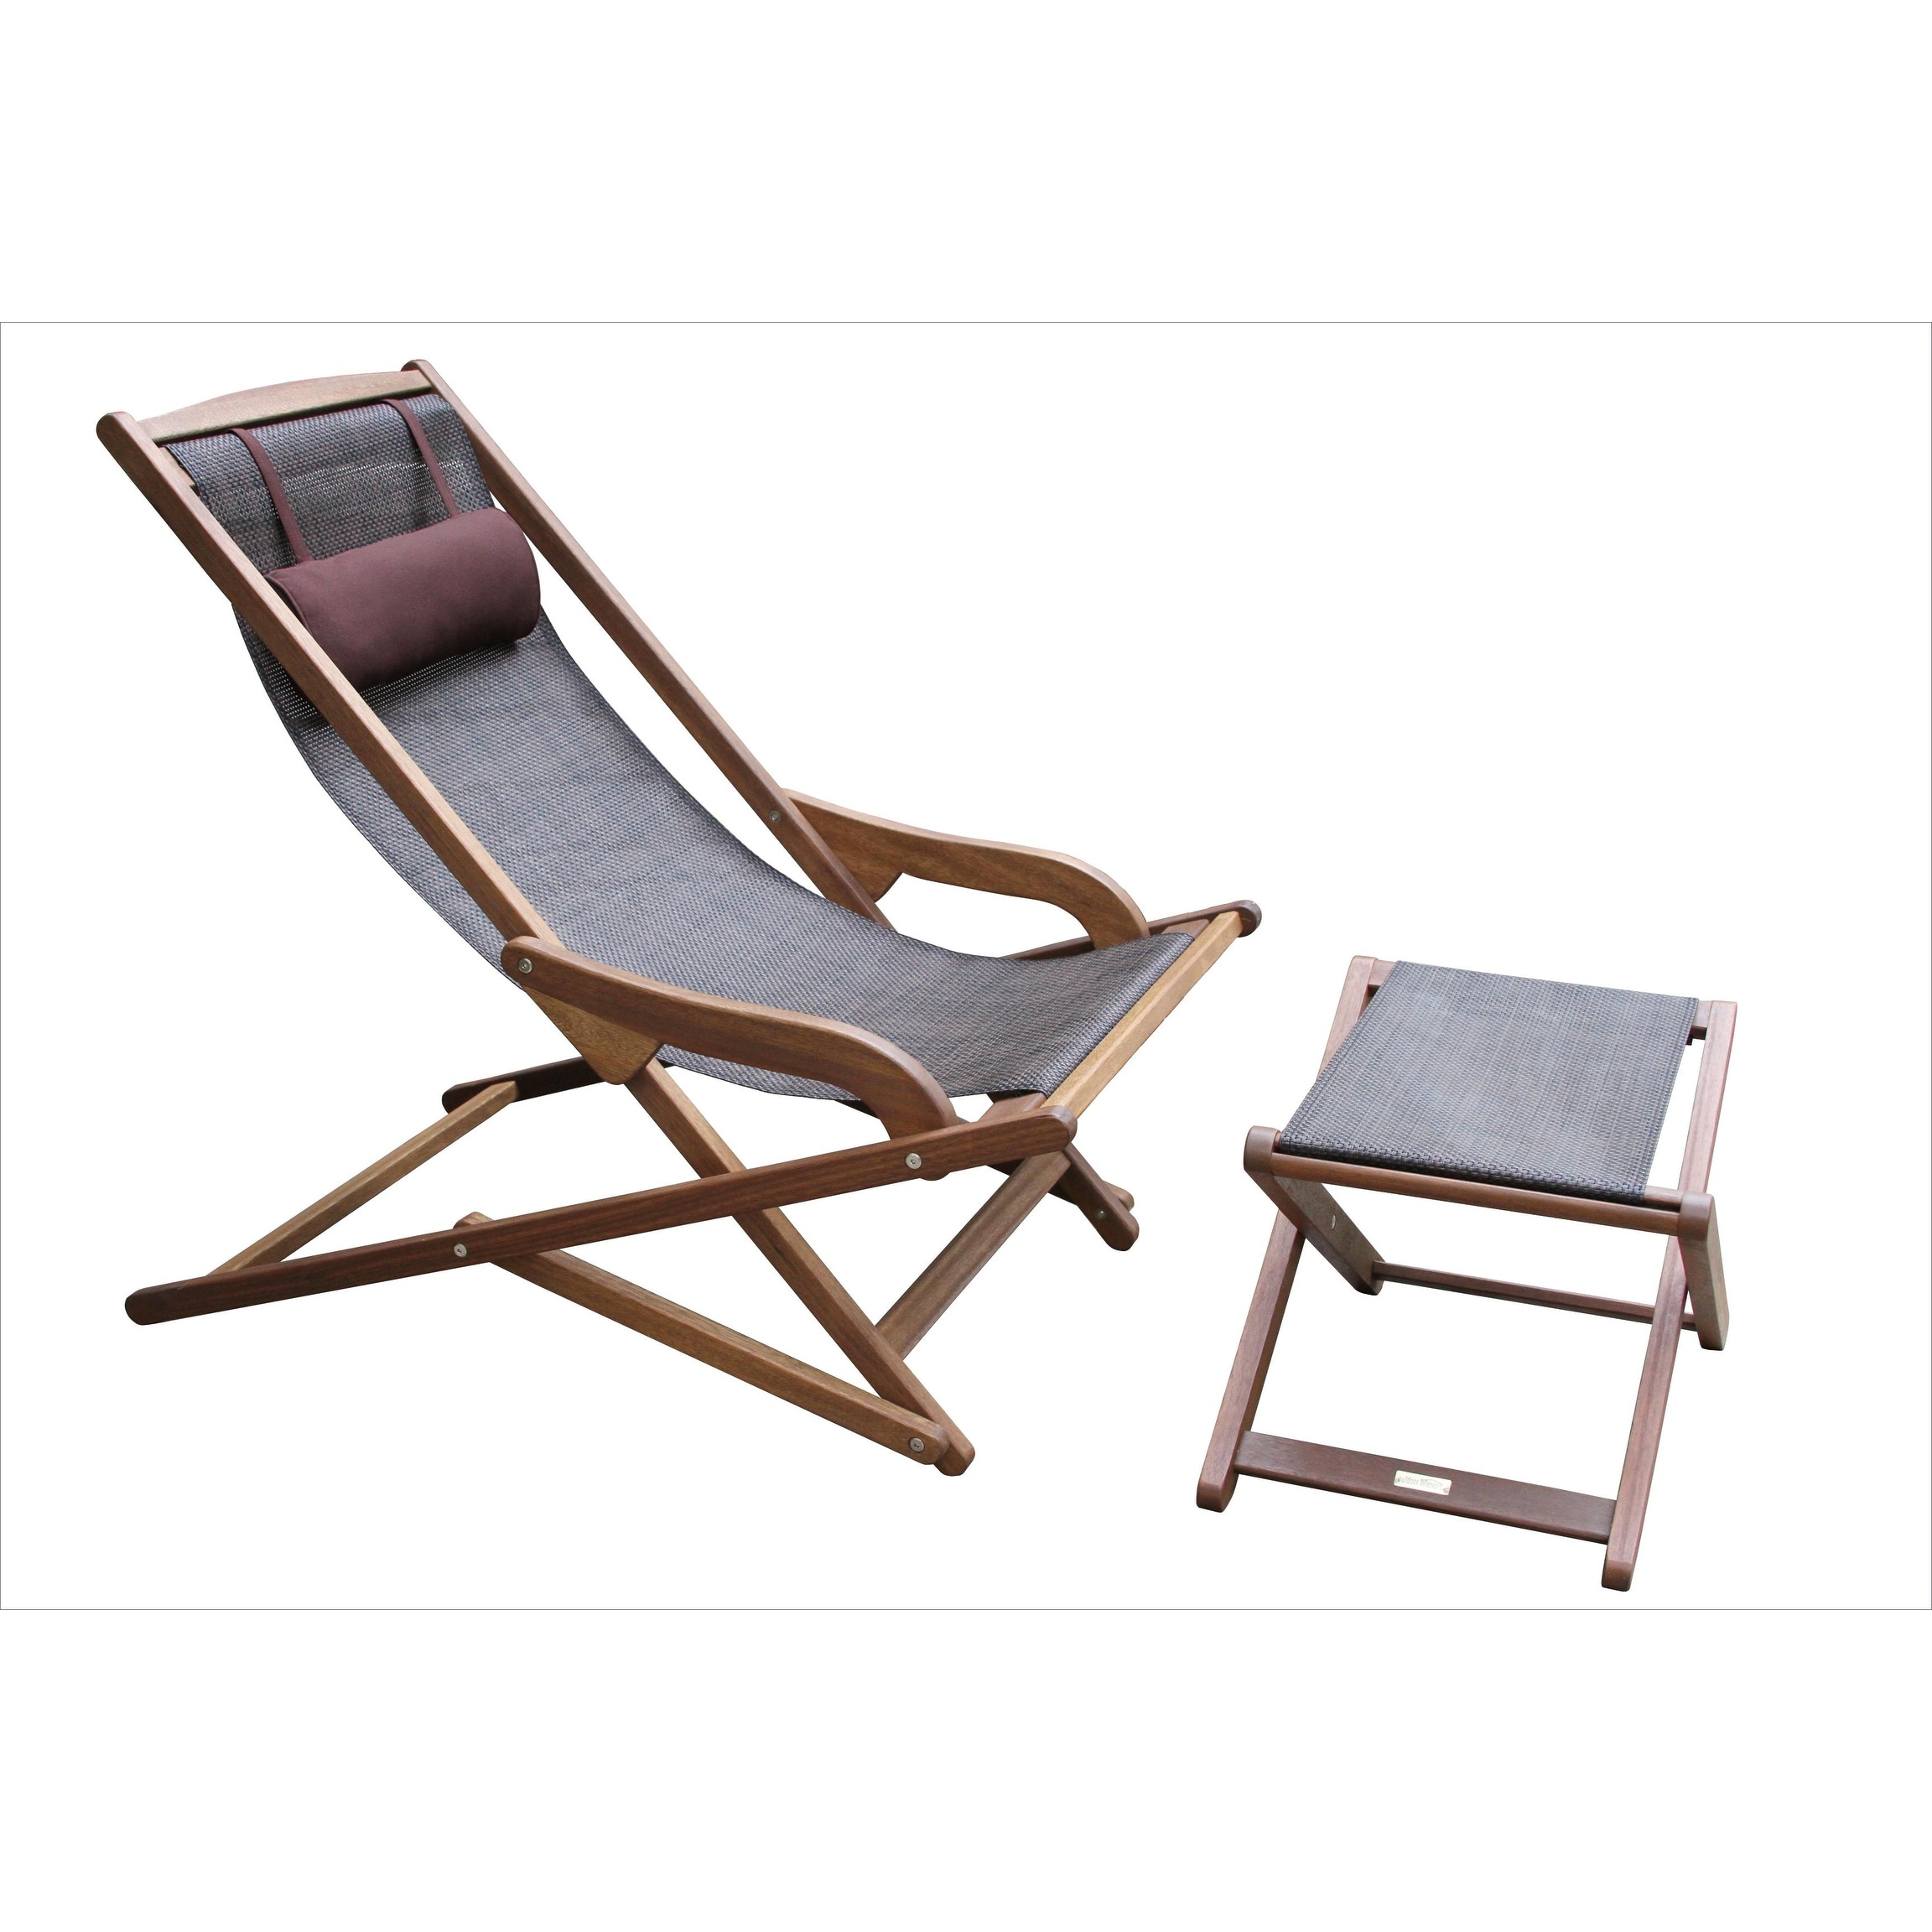 Eilaf 2 Pc. Eucalyptus Sling Lounger Set With Ottoman